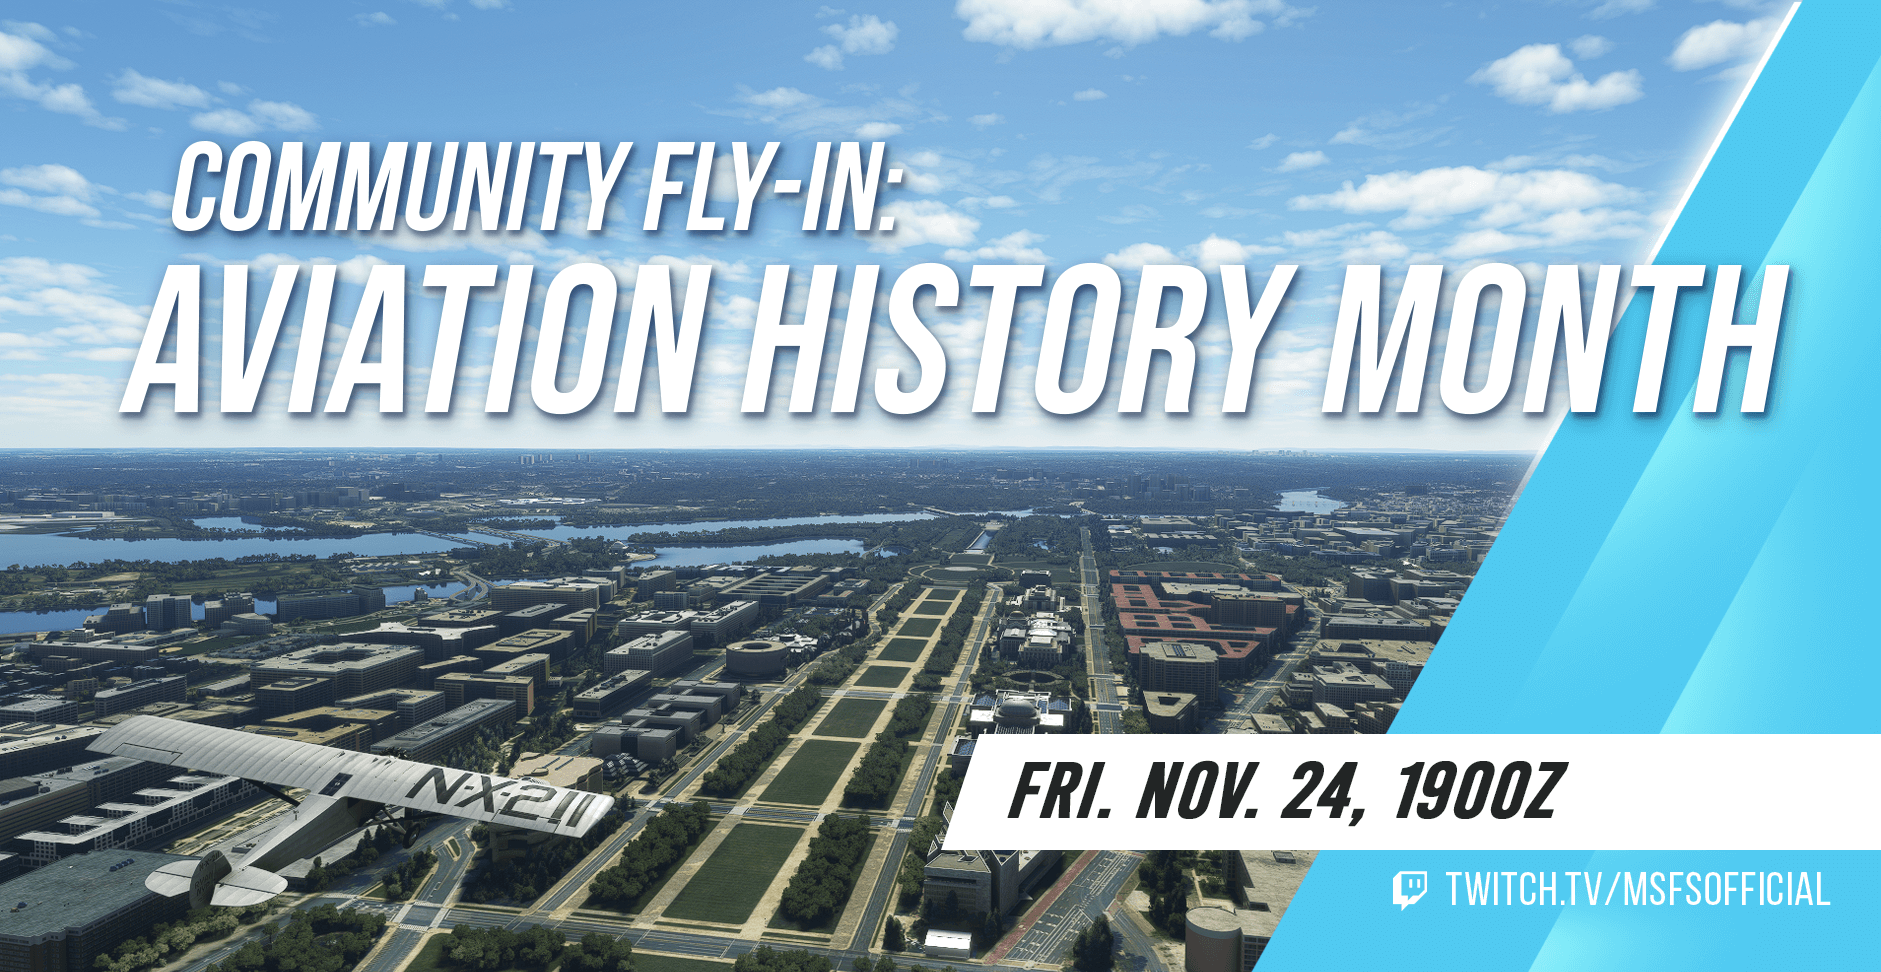 Community Fly-In: Aviation History Month. Friday November 24th 1900z. www.twitch.tv/msfsofficial